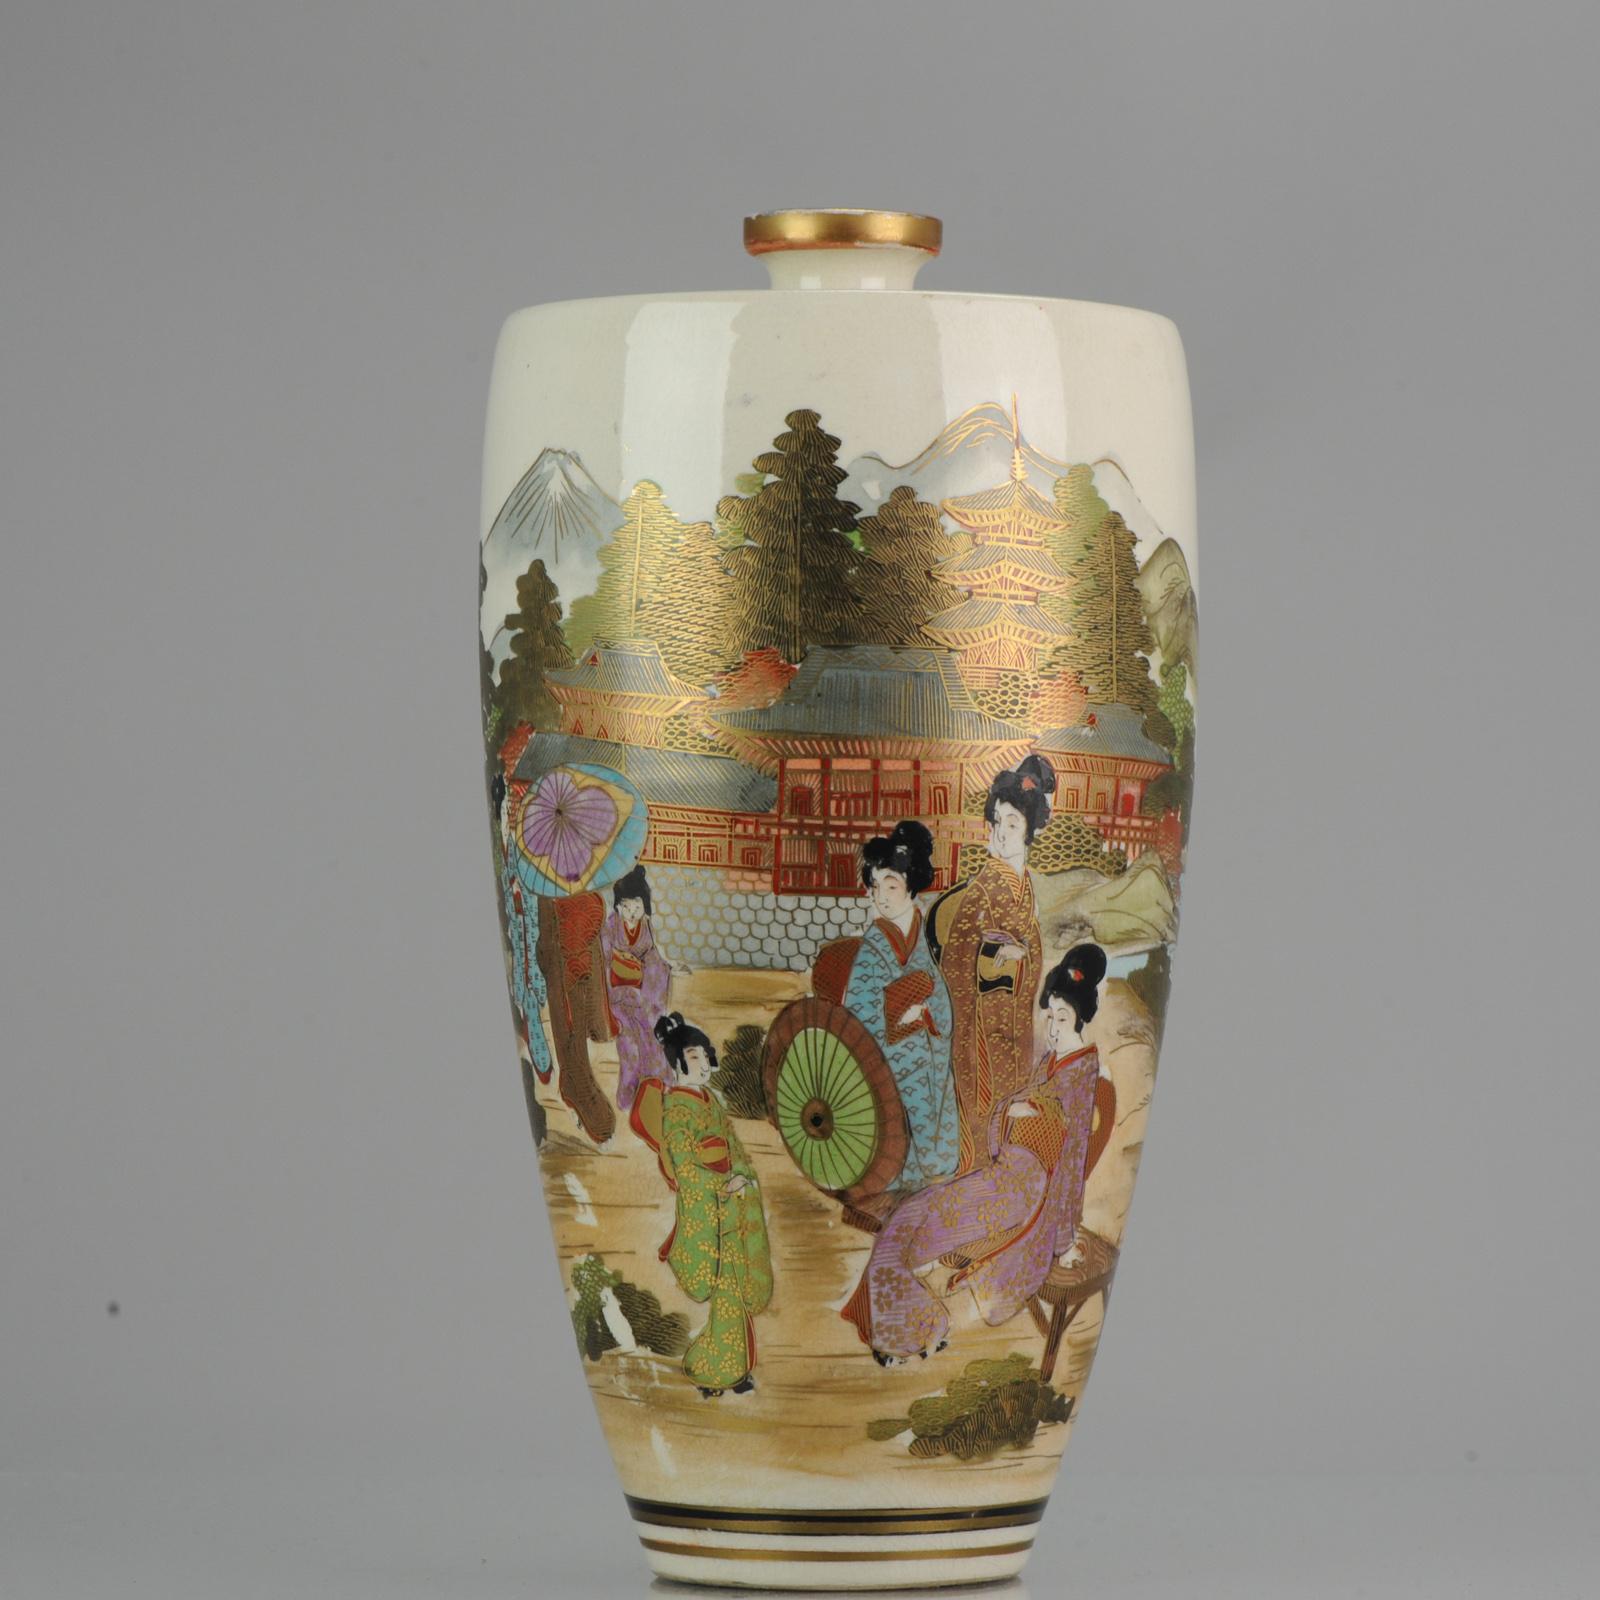 Fabulous Satsuma vase with a circular mountainious landscape scene with a bridge and ladies in a pagode garden.

Condition
Overall condition some spots of enamel loss on the body, besides a hole in the base. Size: approx. 300mm high and 150mm